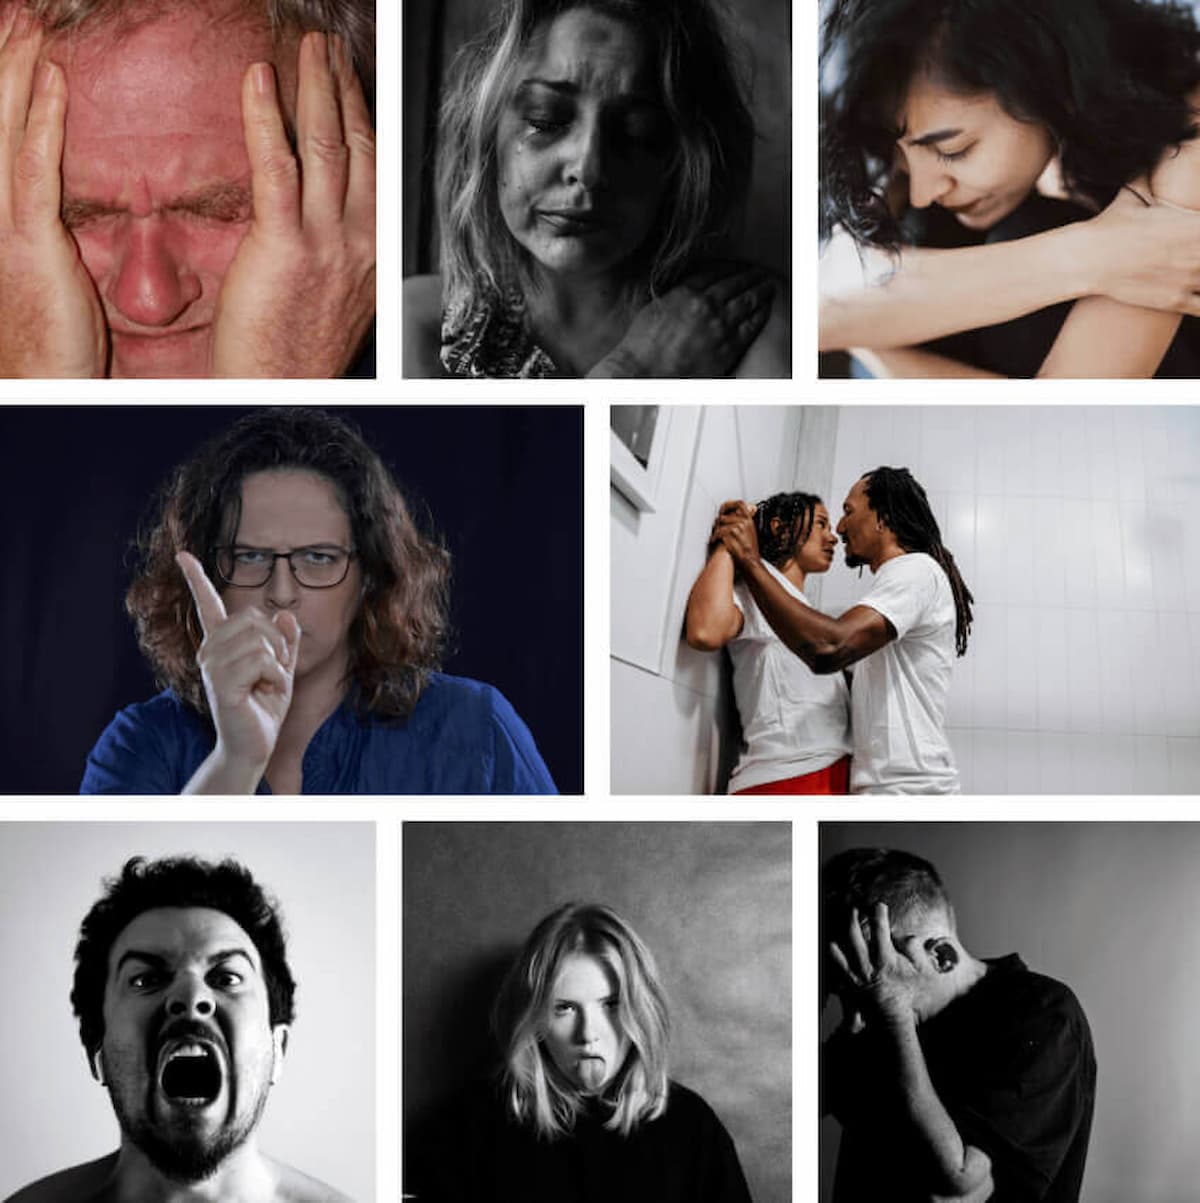 Signs of Emotional Abuse